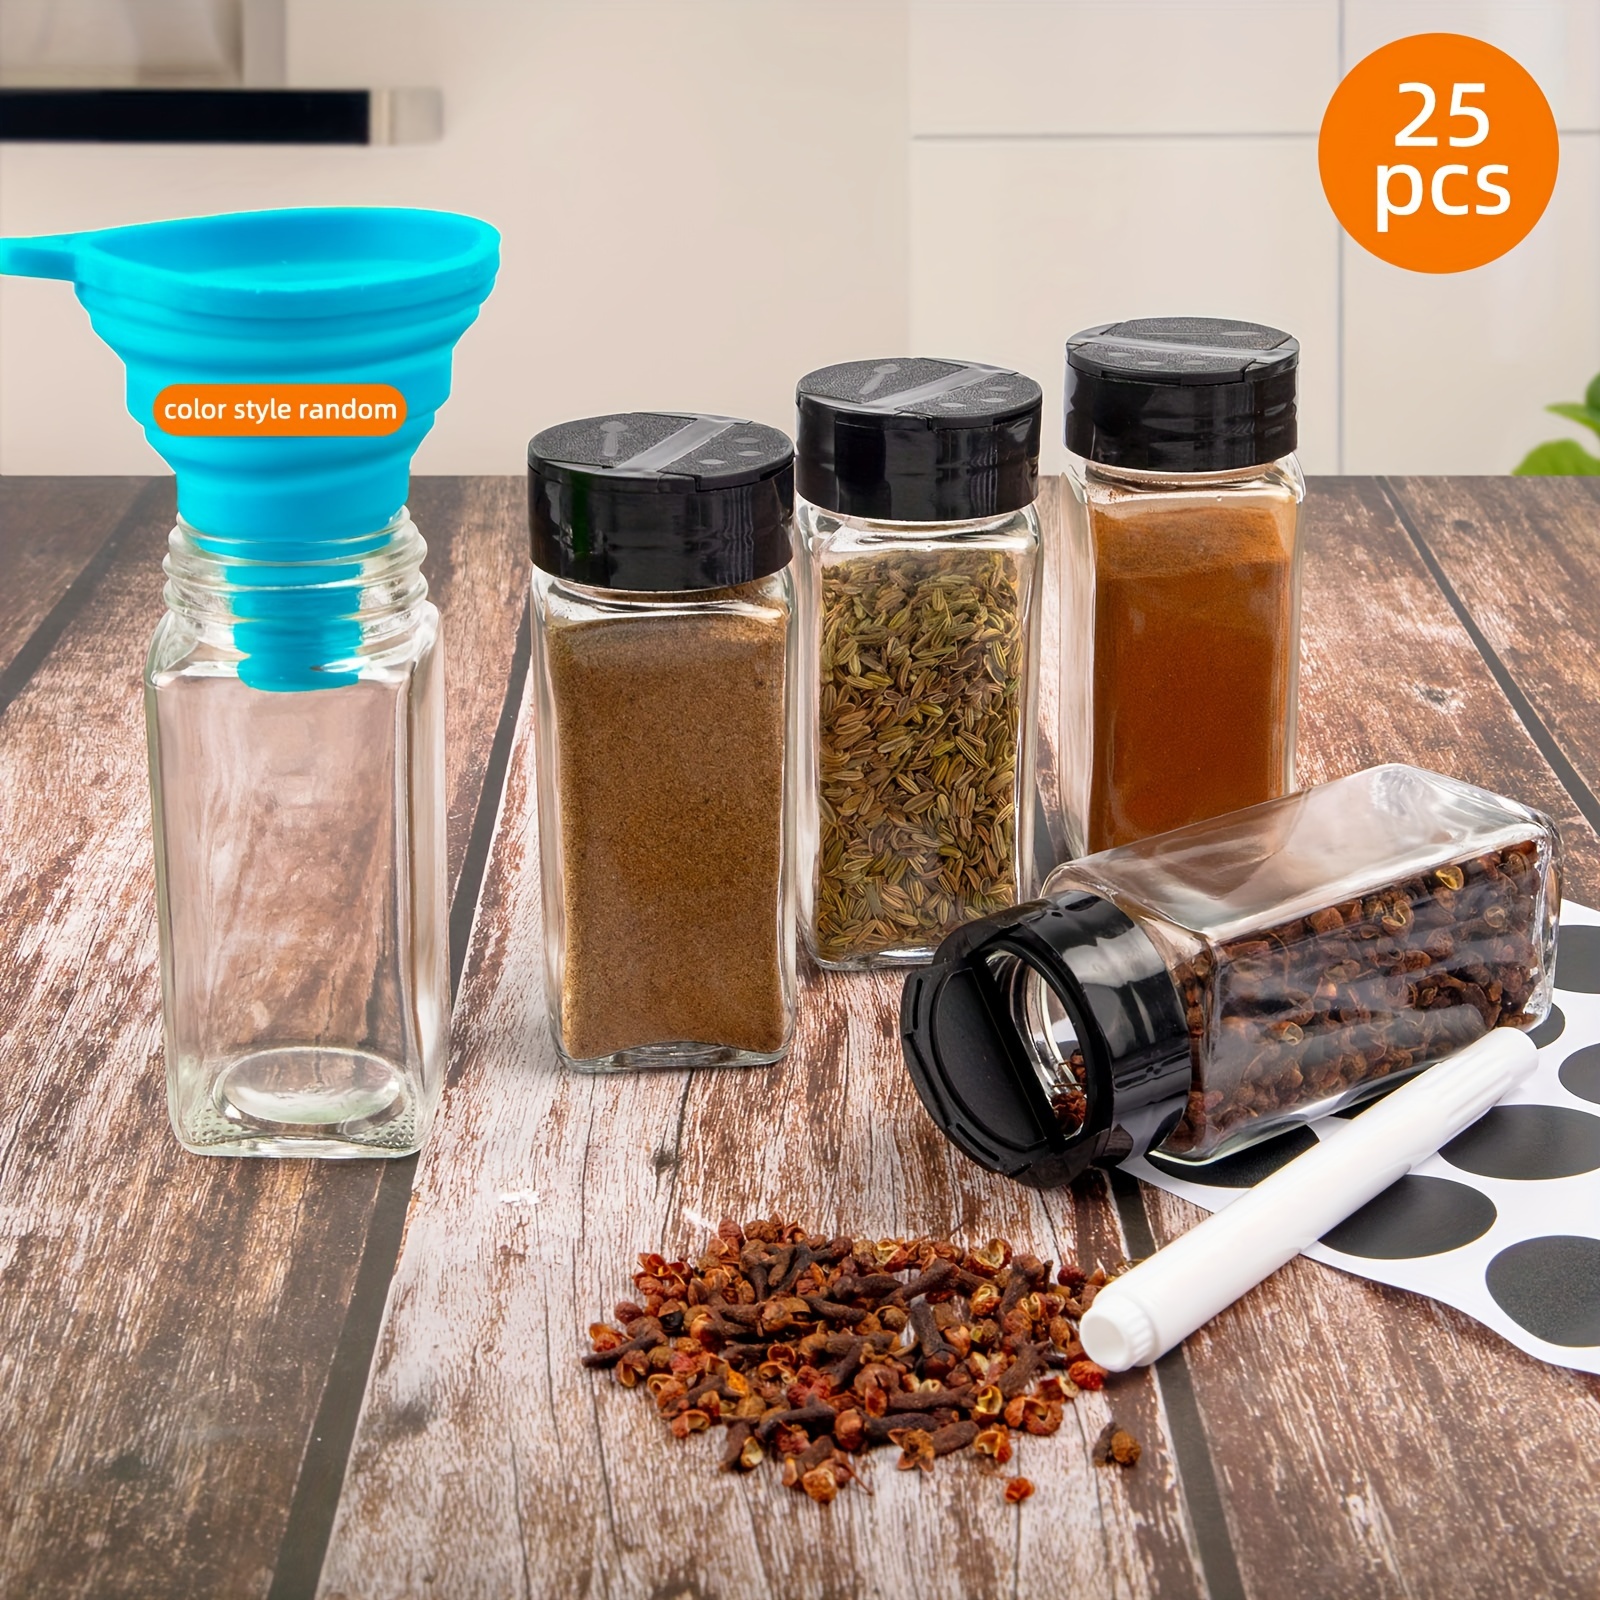 

25 Pcs 4 Ounces (about 113.4 Grams) Glass Seasoning Tank, Black Lid, Suitable For Finishing Drawers, Seasonings, Salt, Pepper, Herbal Medicine, Silicone Folding Funnel, Brush And Chalk